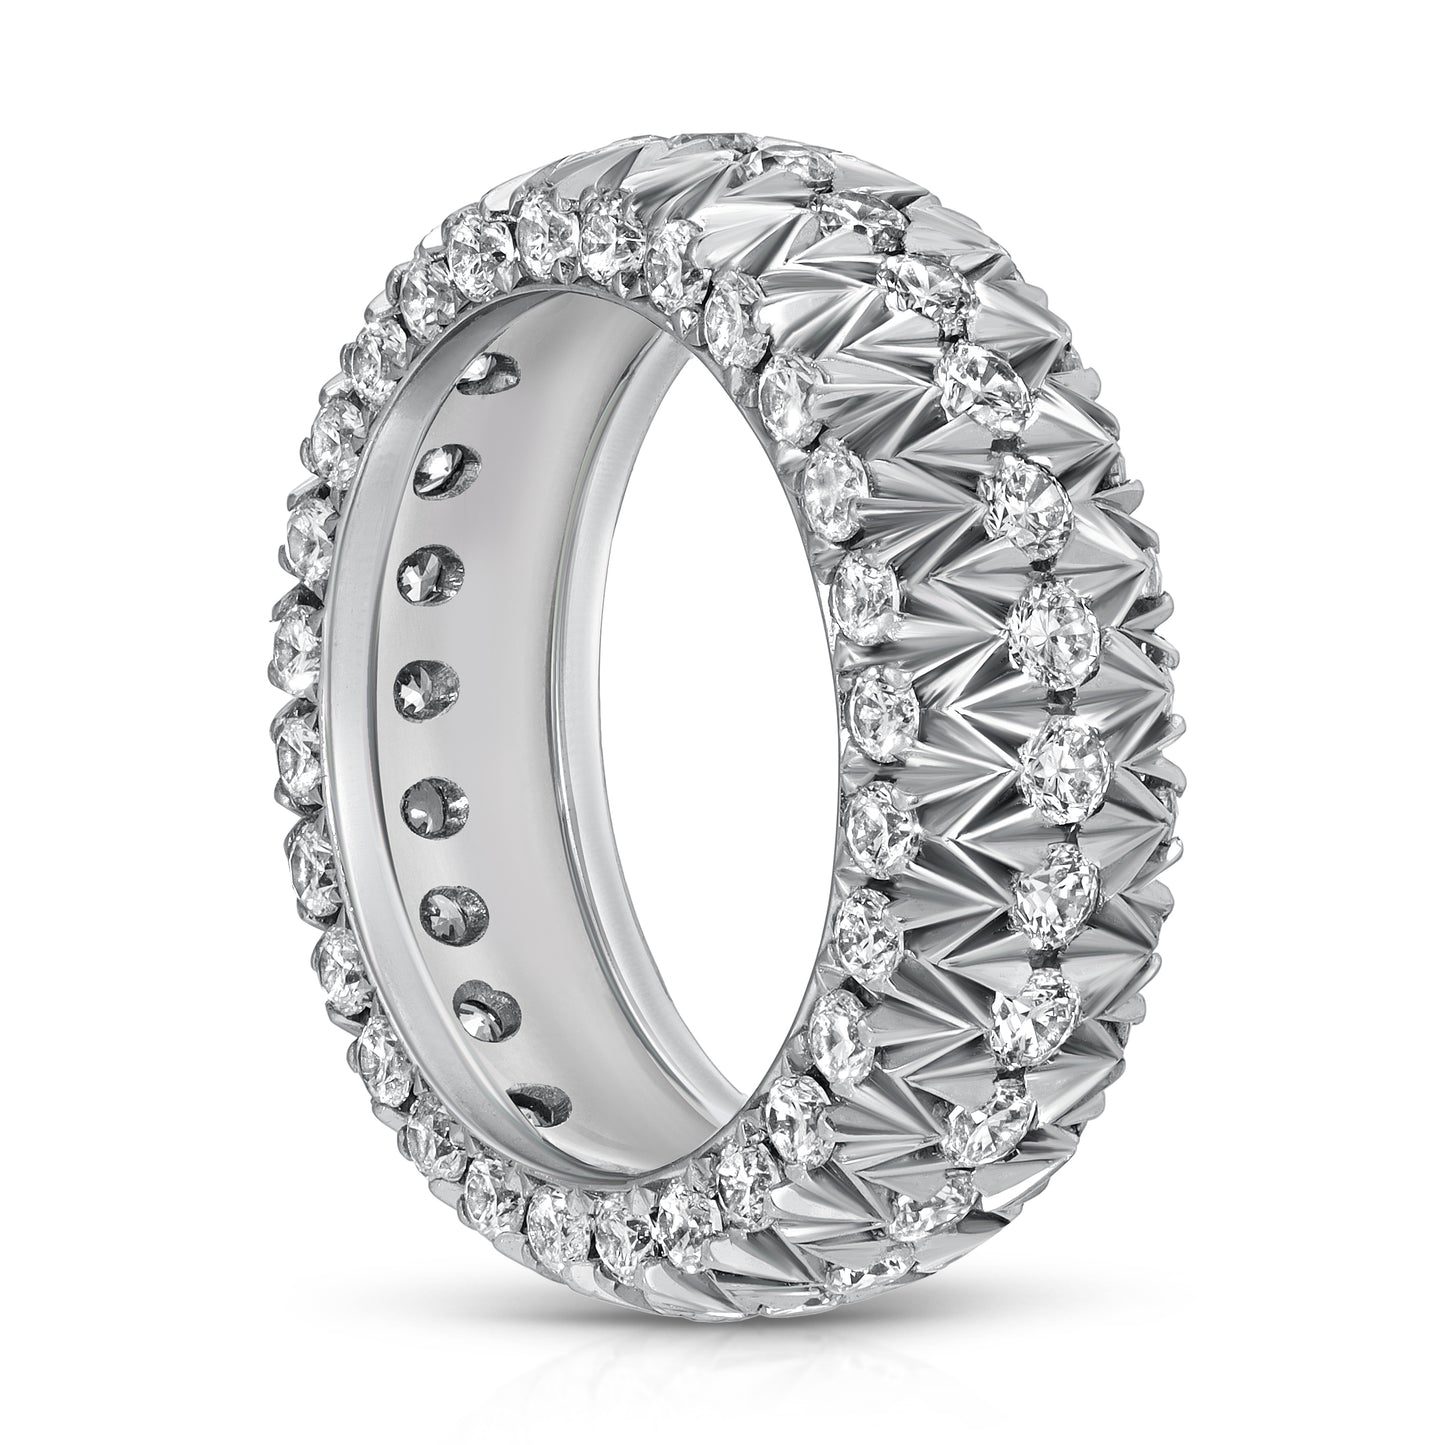 3.2 CTTW Diamond French Pave Ring In 18k White Gold